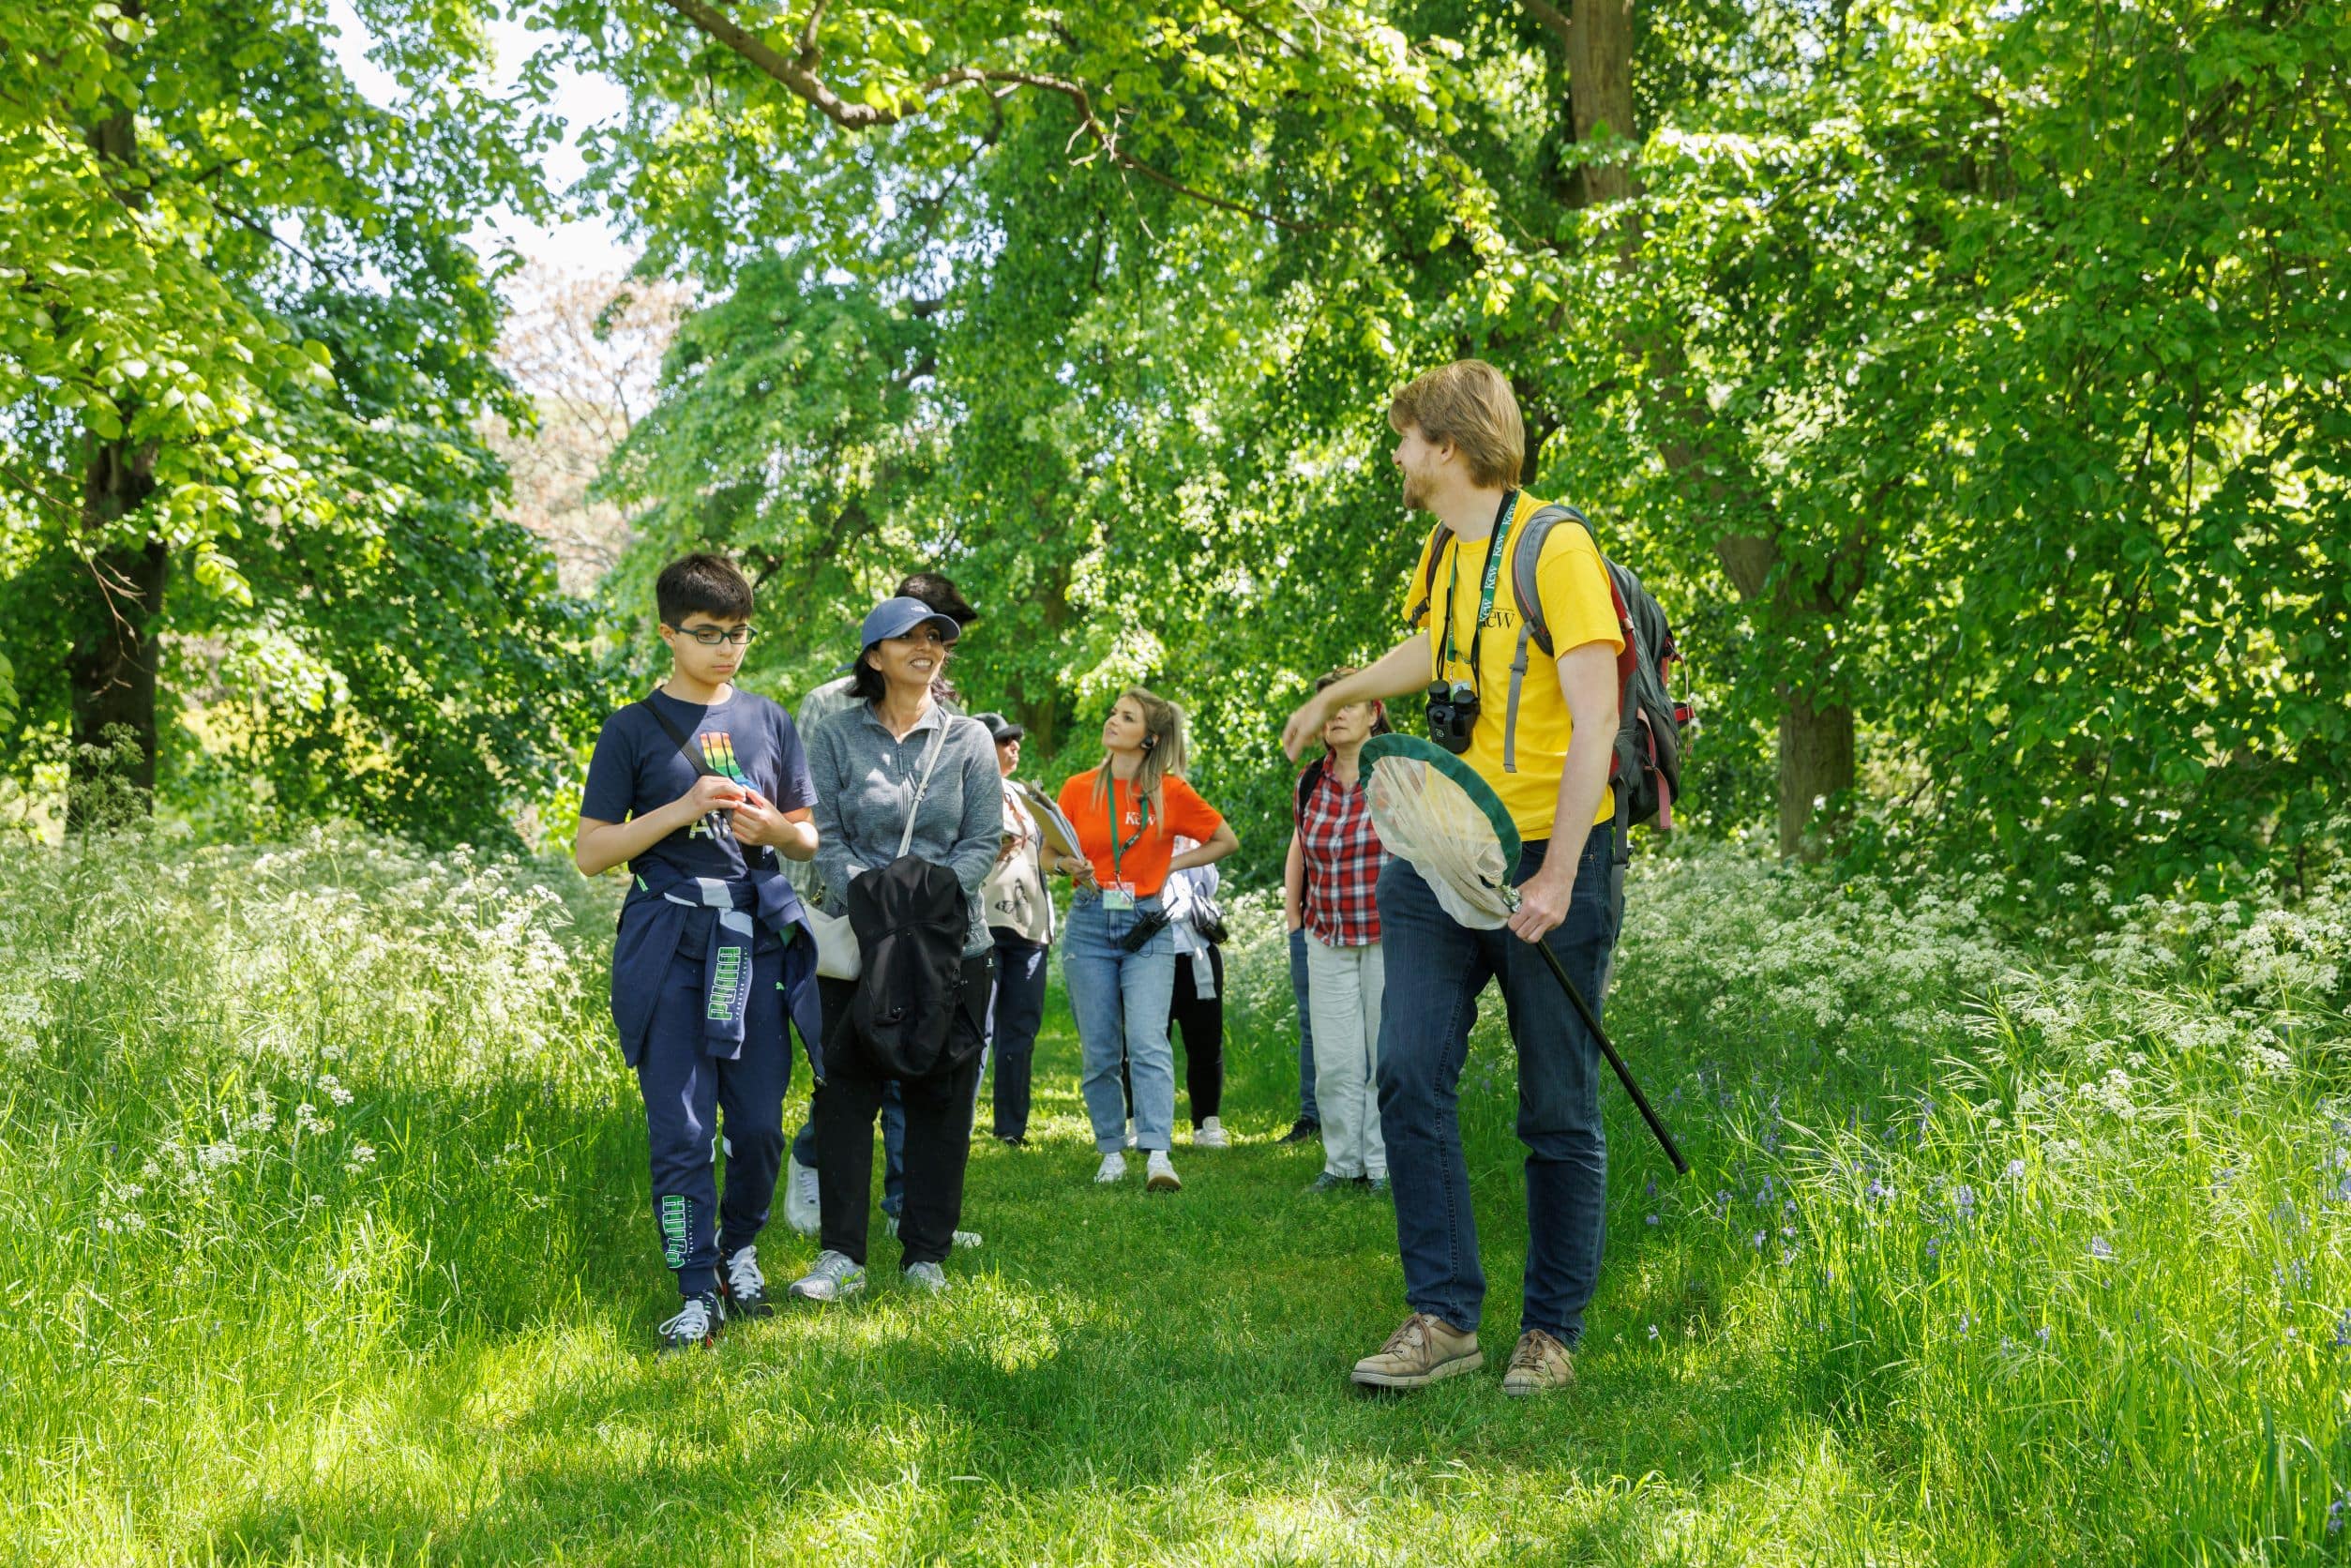 Kew scientist leading a group of people on a pollination trail